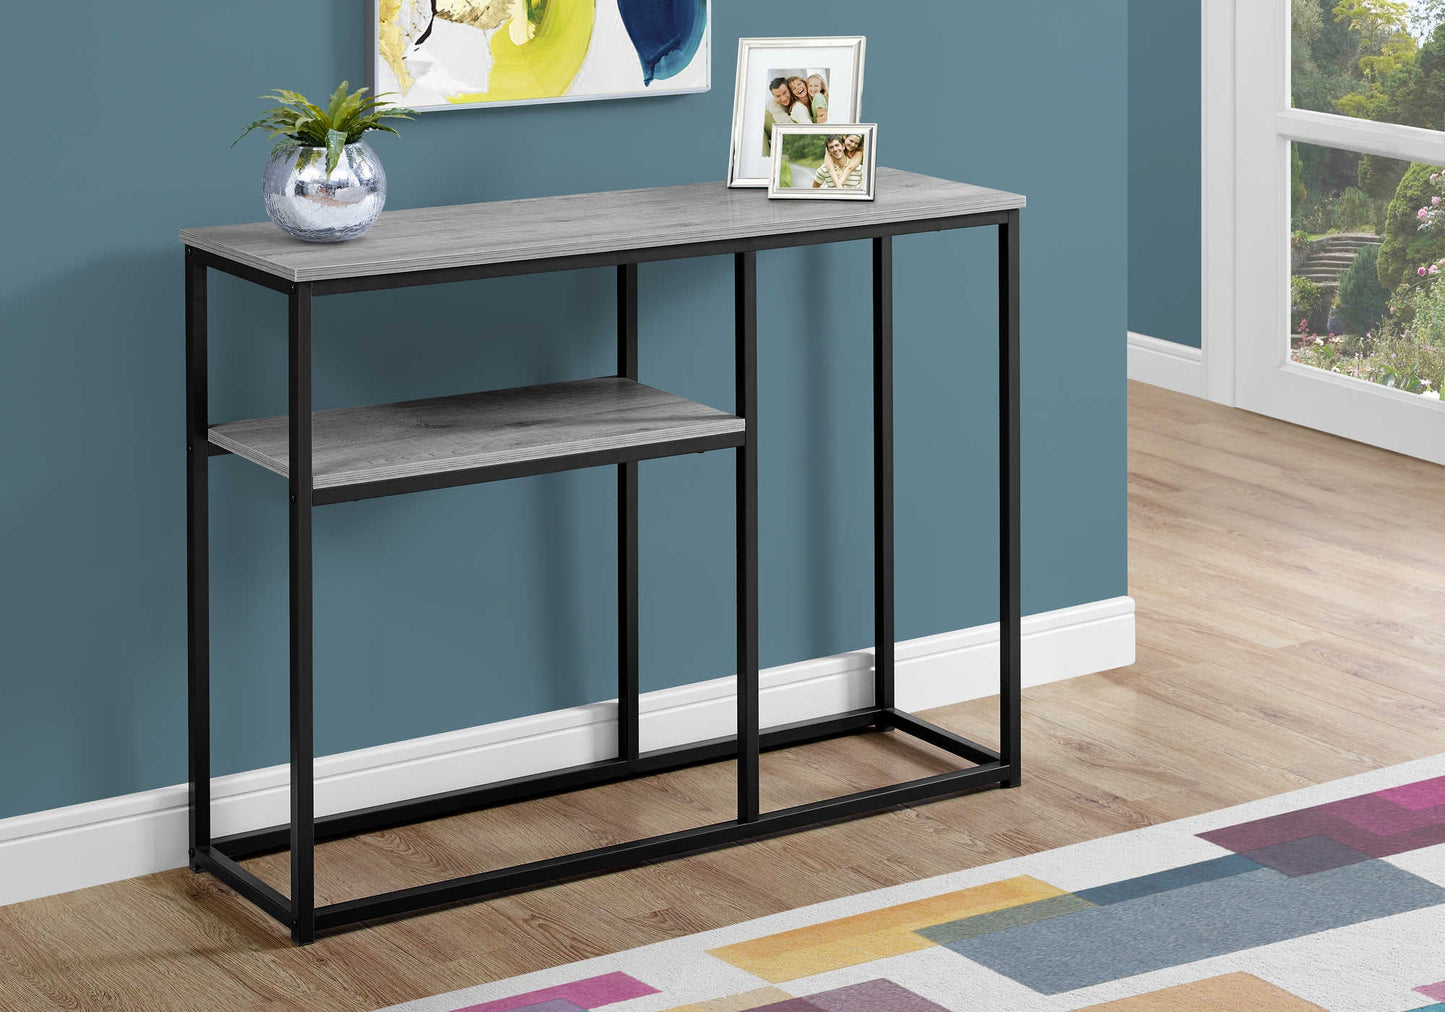 42"L 2-tier Metal Frame with Laminate Top Bedroom Accent Console Table